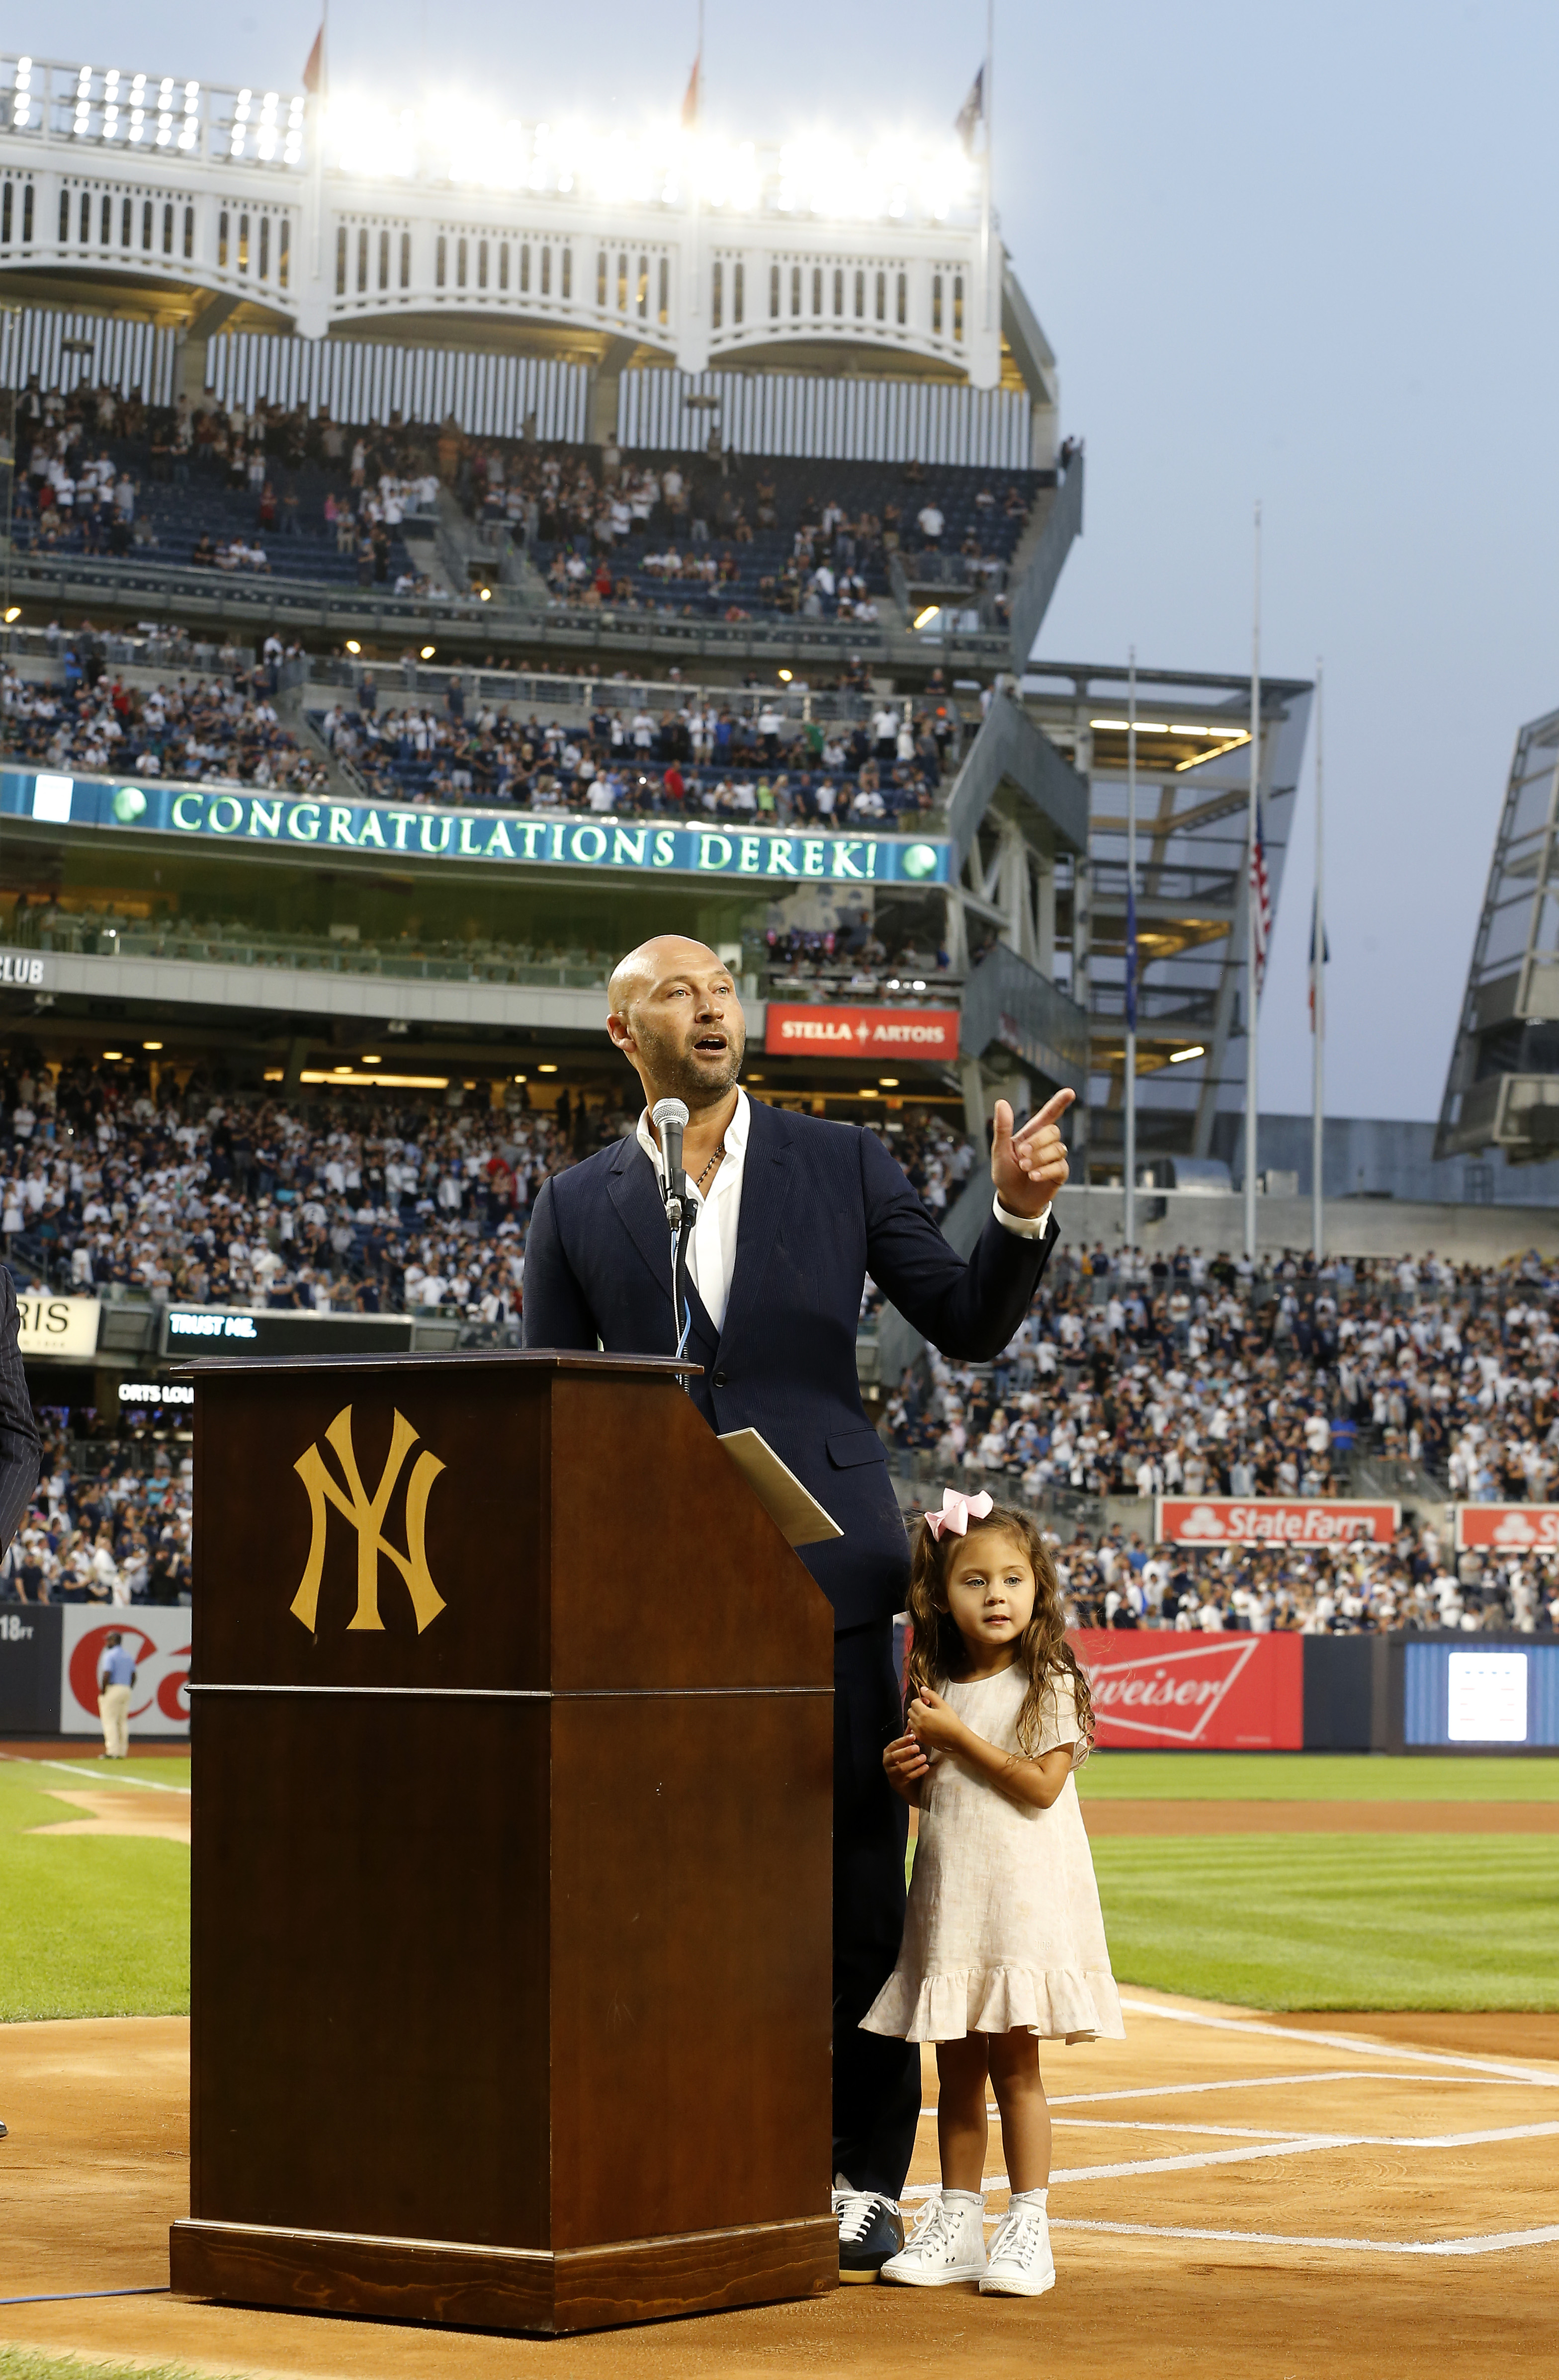 Derek Jeter and his daughter Story at the Yankee Stadium in September 2022, in New York City. | Source: Getty Images